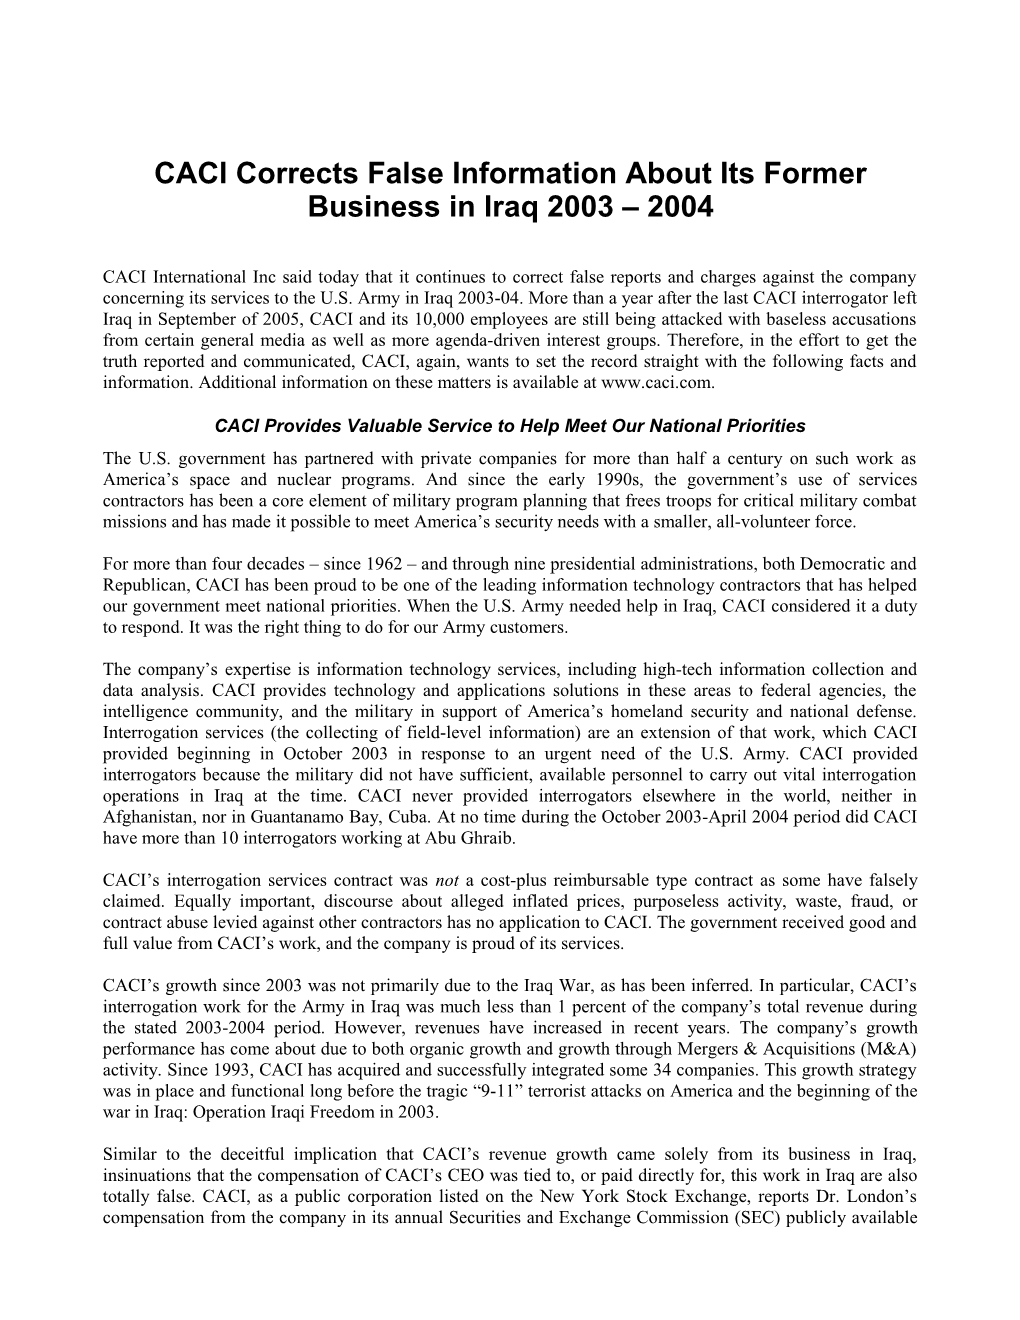 CACI Corrects False Information About Its Former